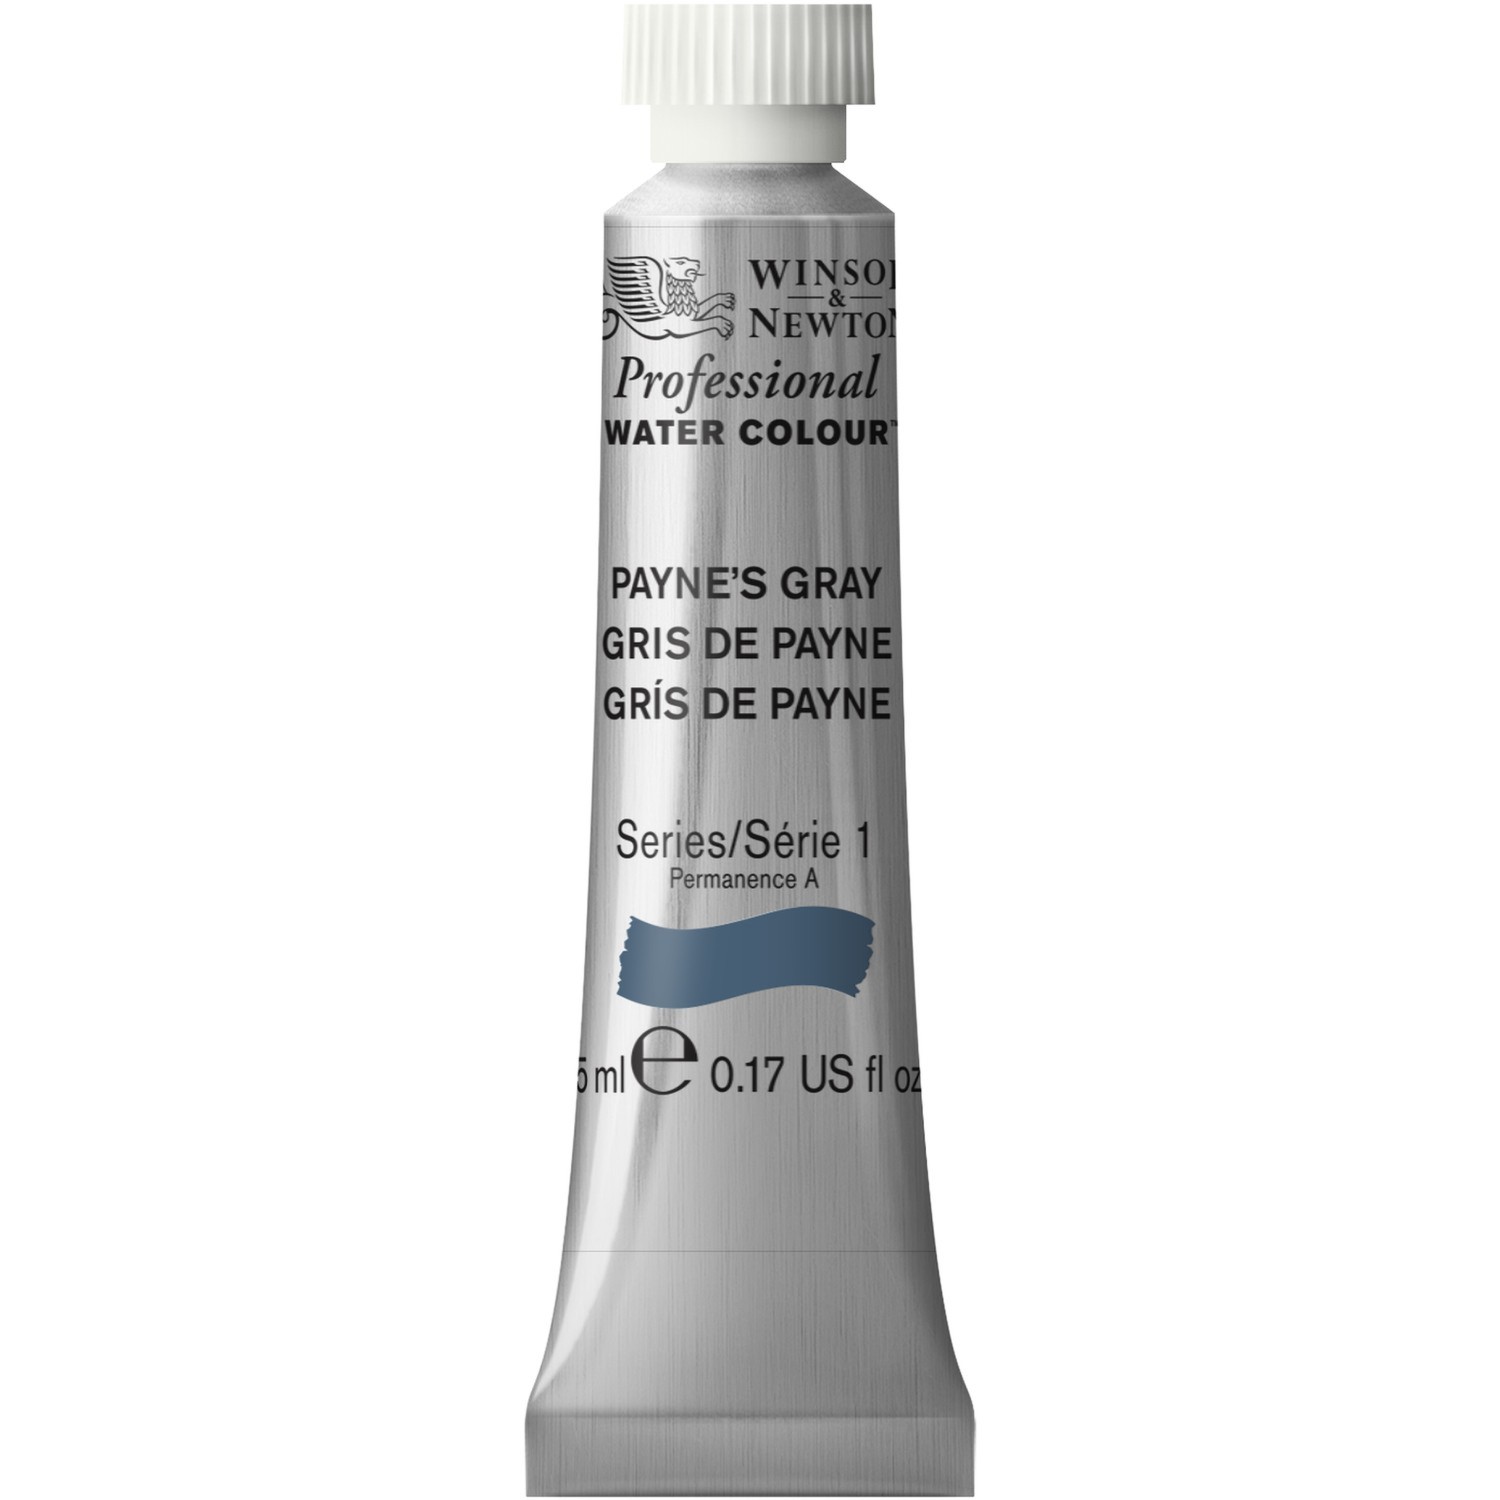 Winsor and Newton 5ml Professional Watercolour Paint - Paynes Grey Image 1